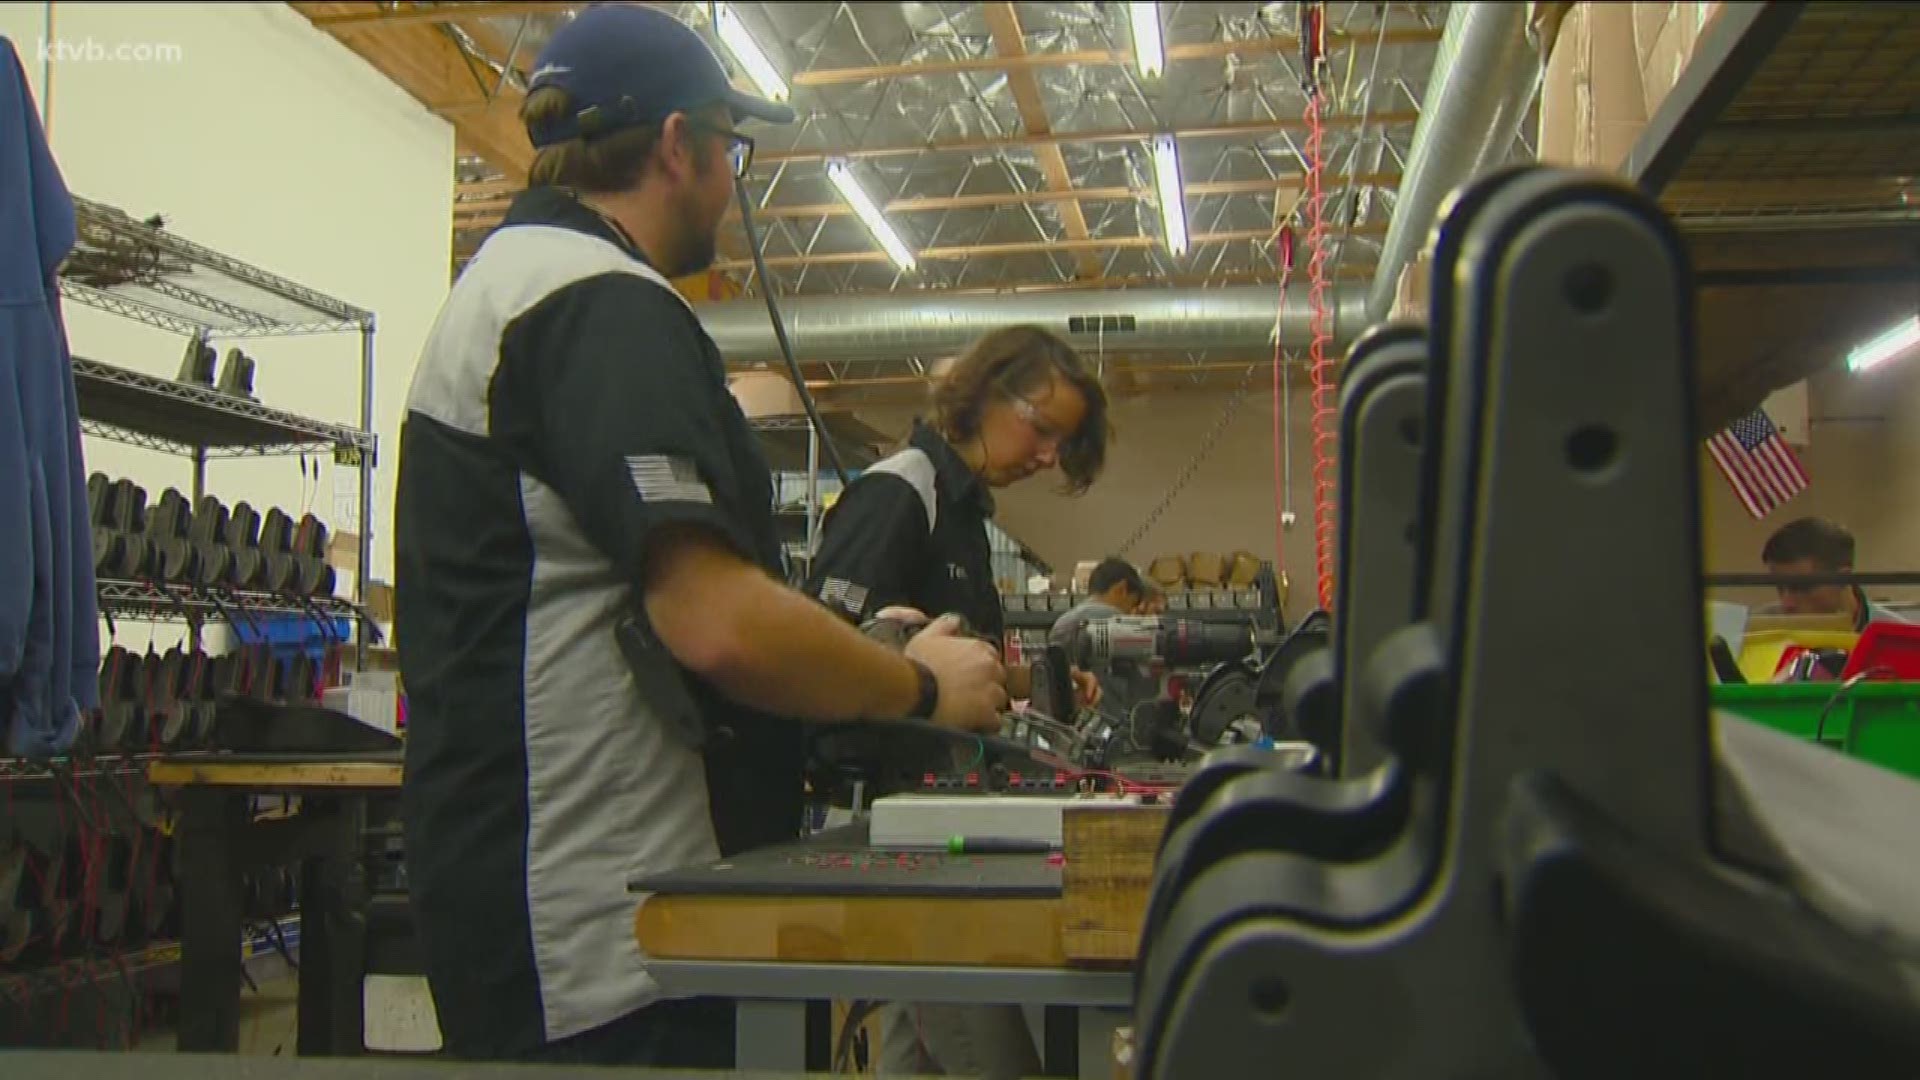 Blac-Rac Manufacturing Company says the increased cost of parts they buy from China has put the company's future in jeopardy.